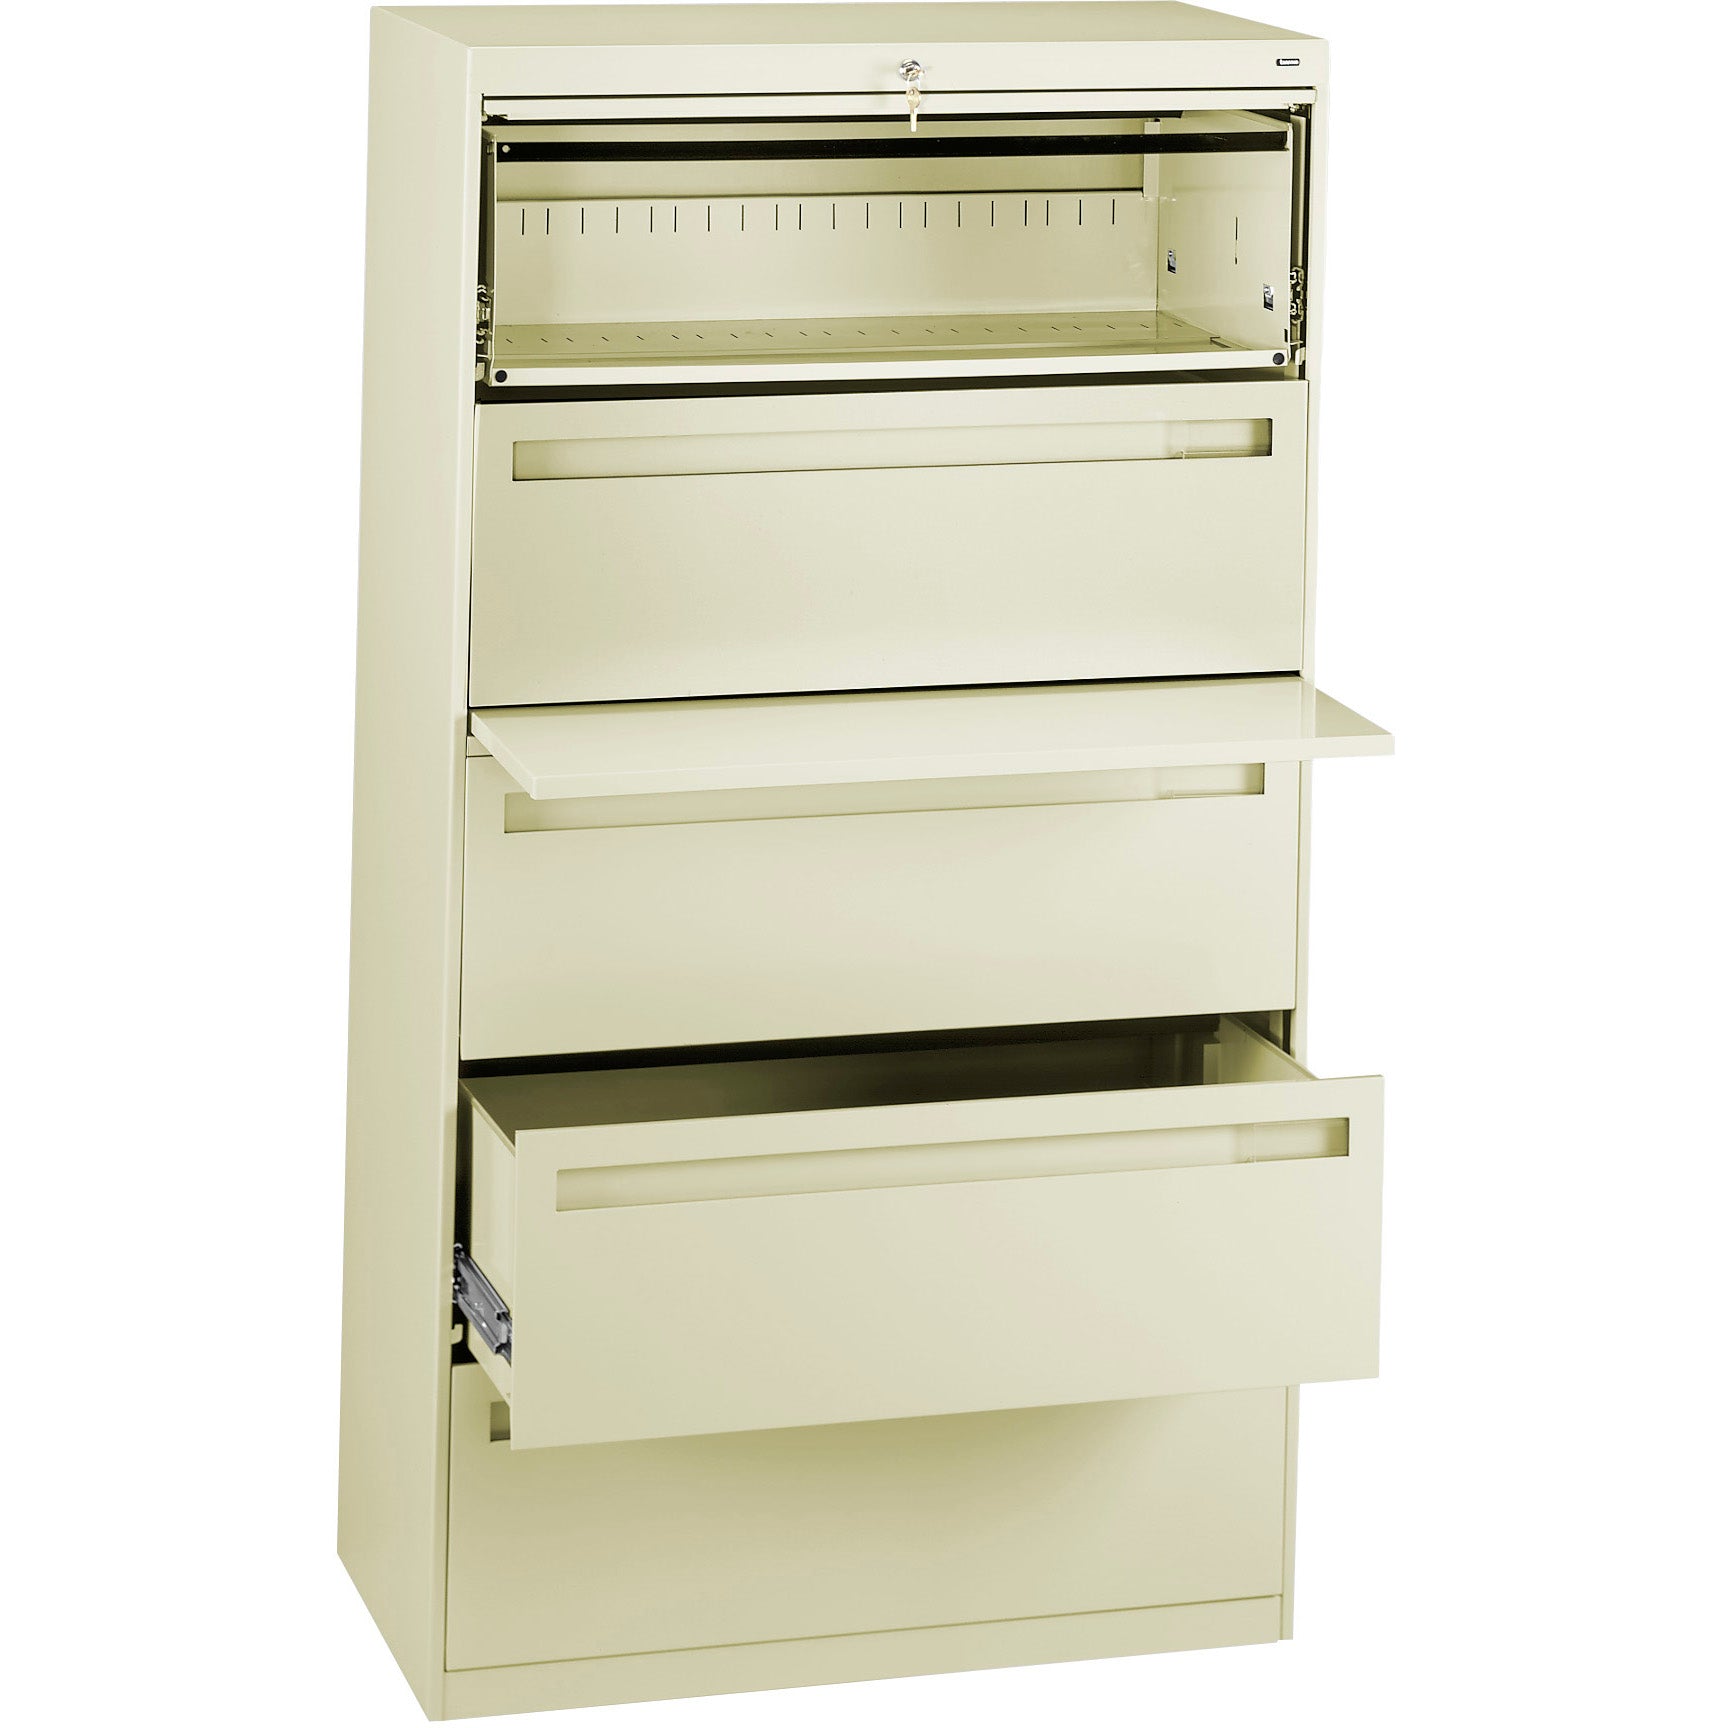 Tennsco 36" Wide Five-Drawer Lateral File with Fixed Drawer Fronts, LPL3660L50